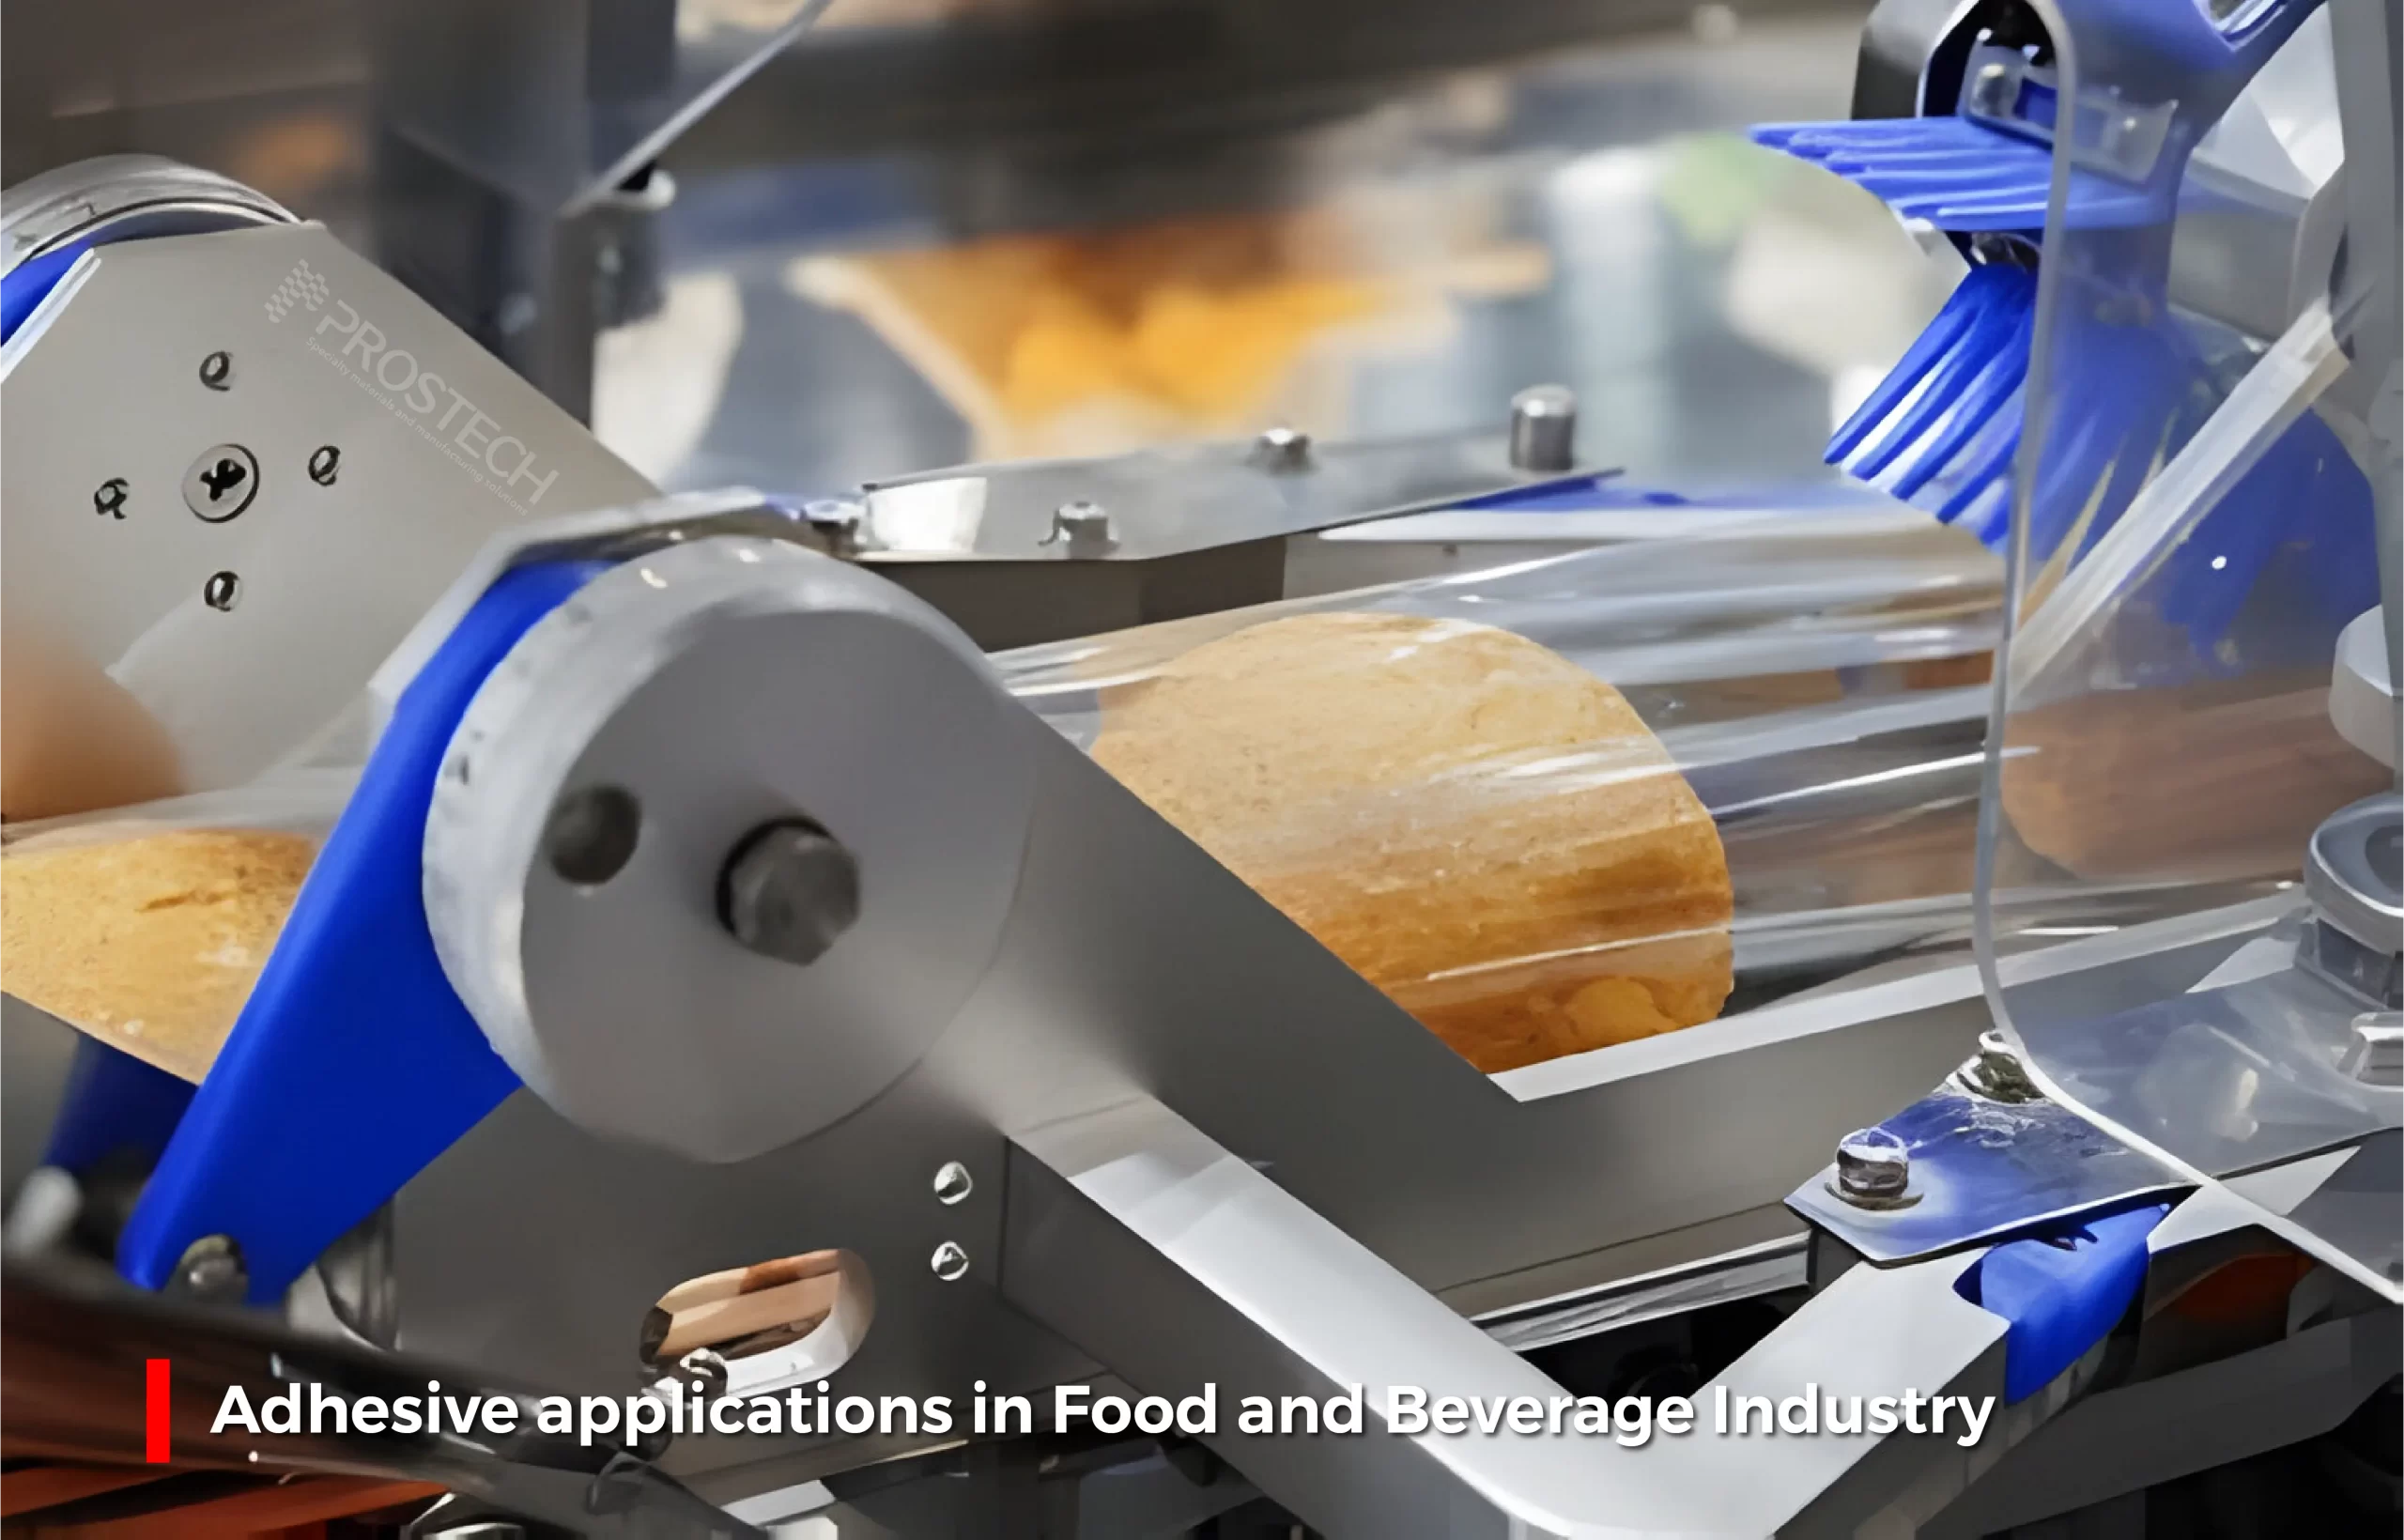 Adhesive applications in Food and Beverage Industry